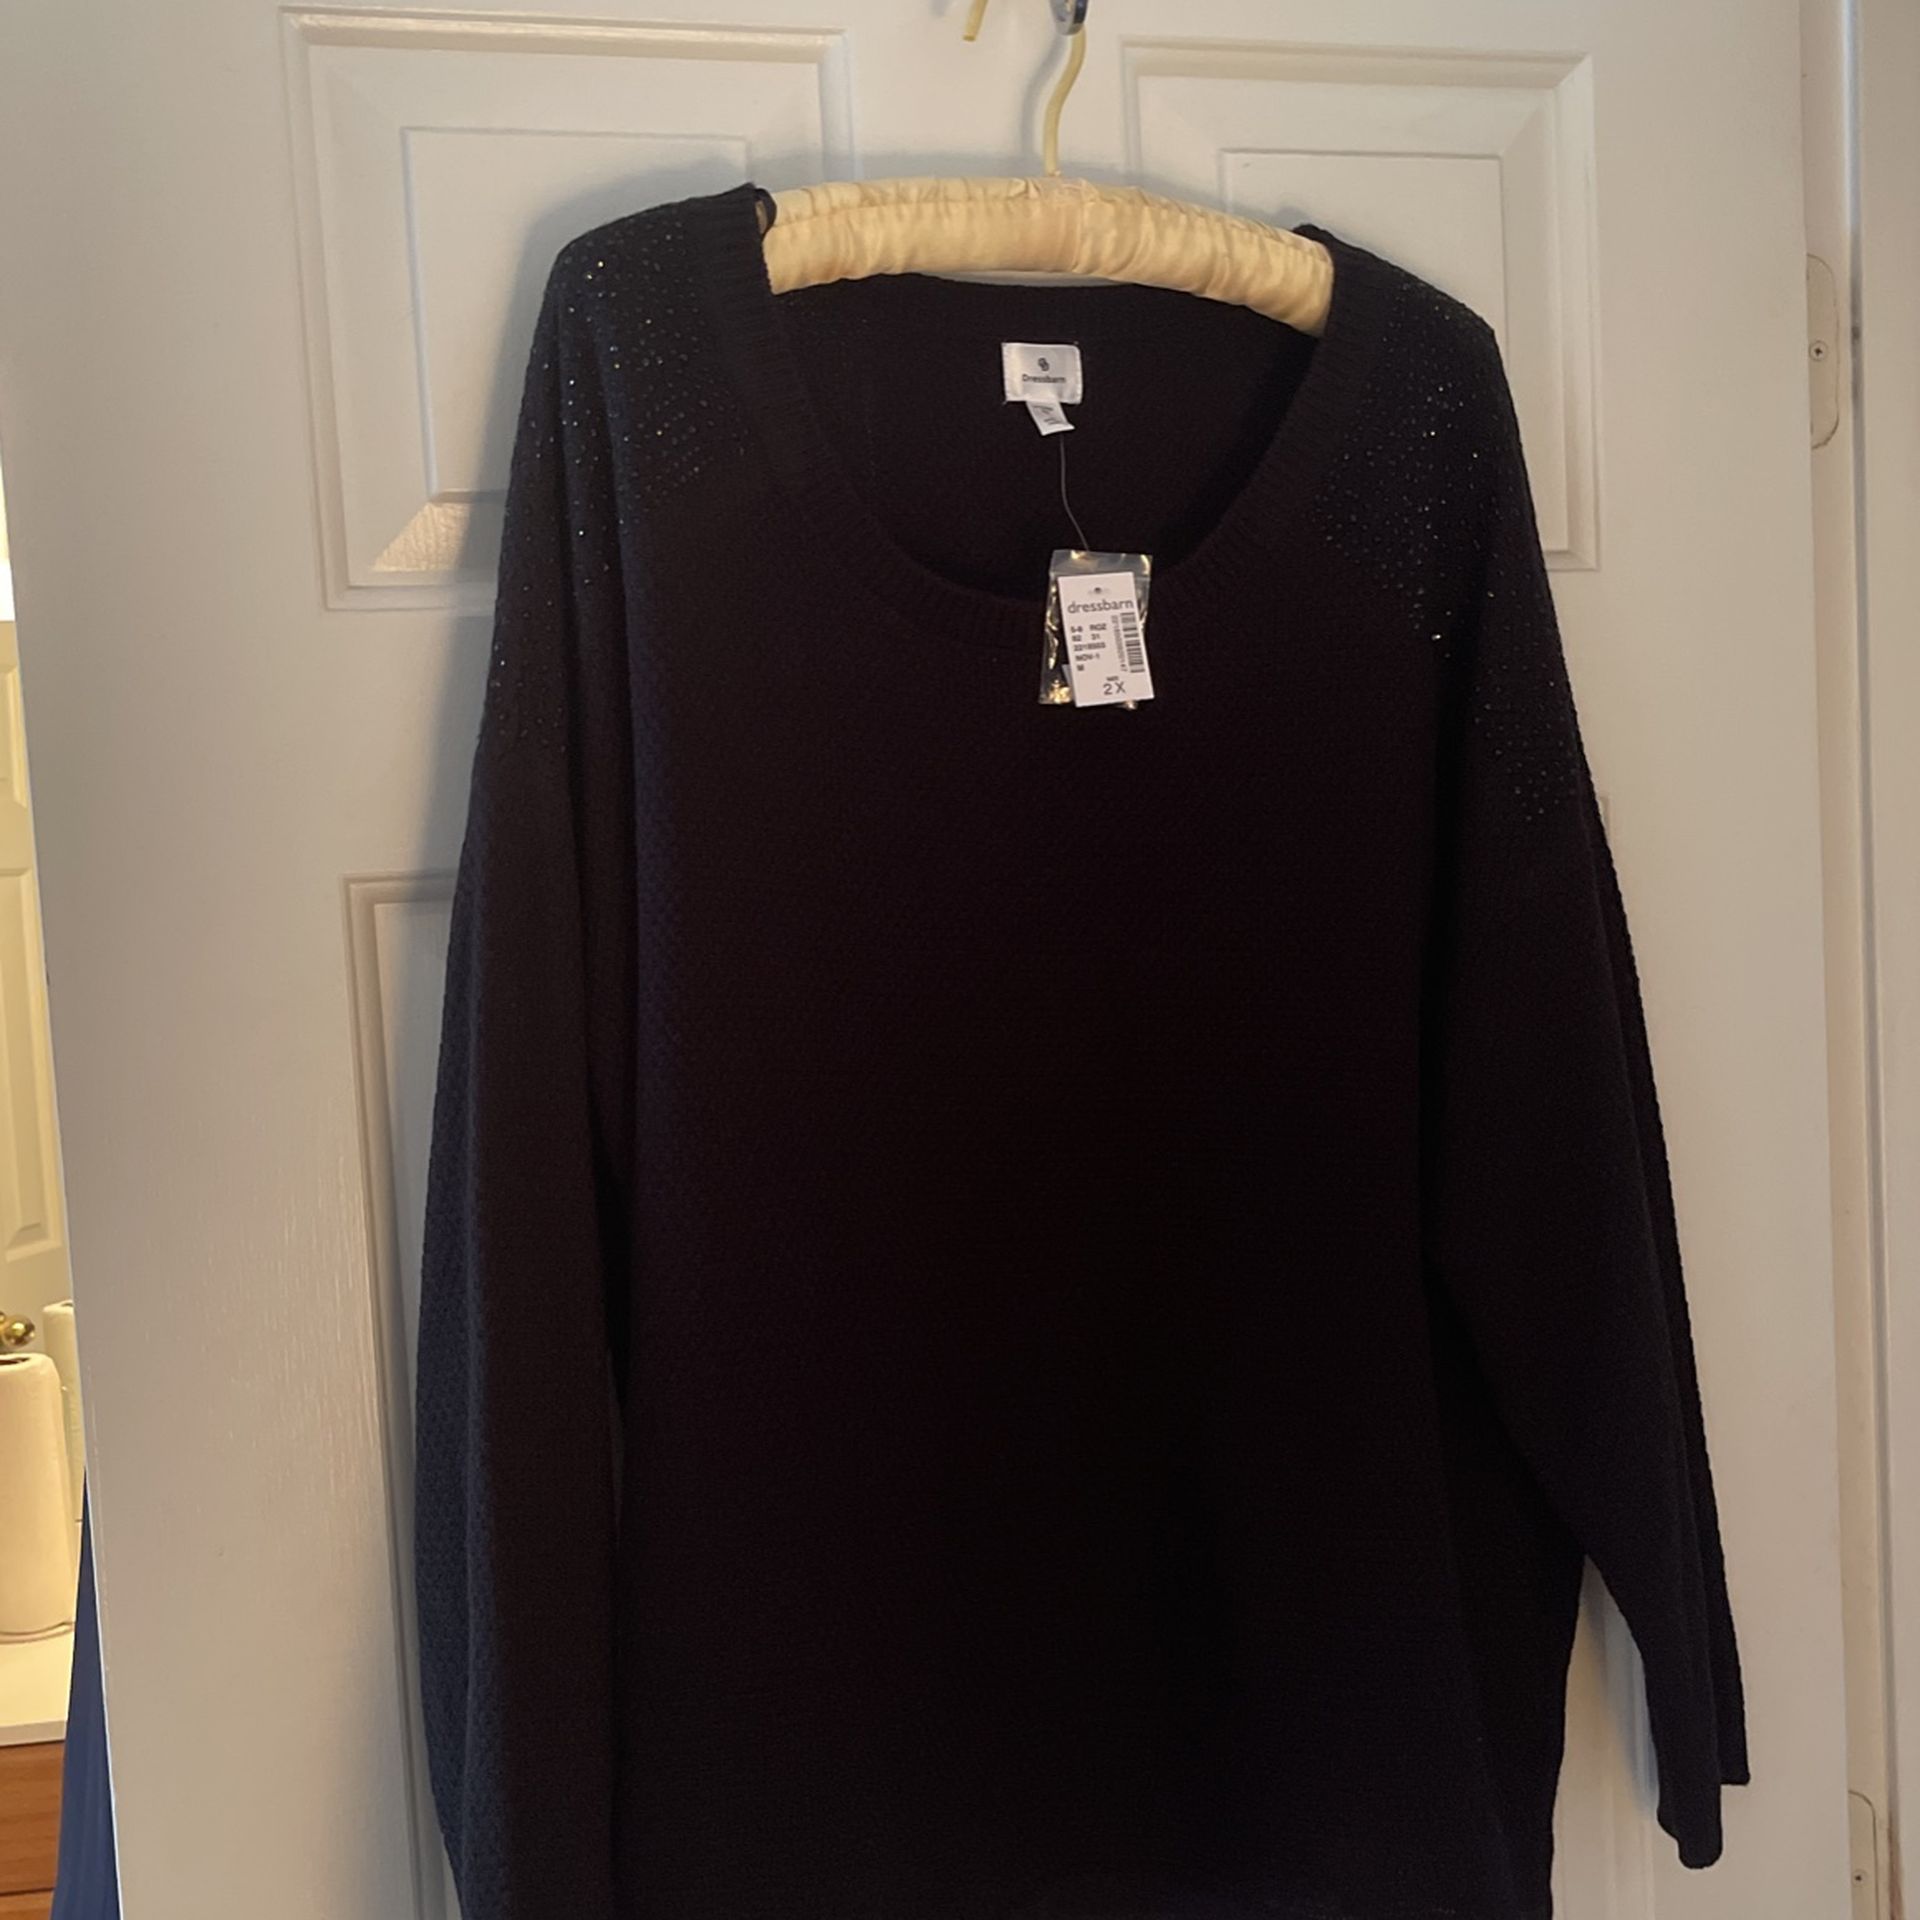 New Dress Barn Color Black Woman’s Sweater With Black Beading Accents